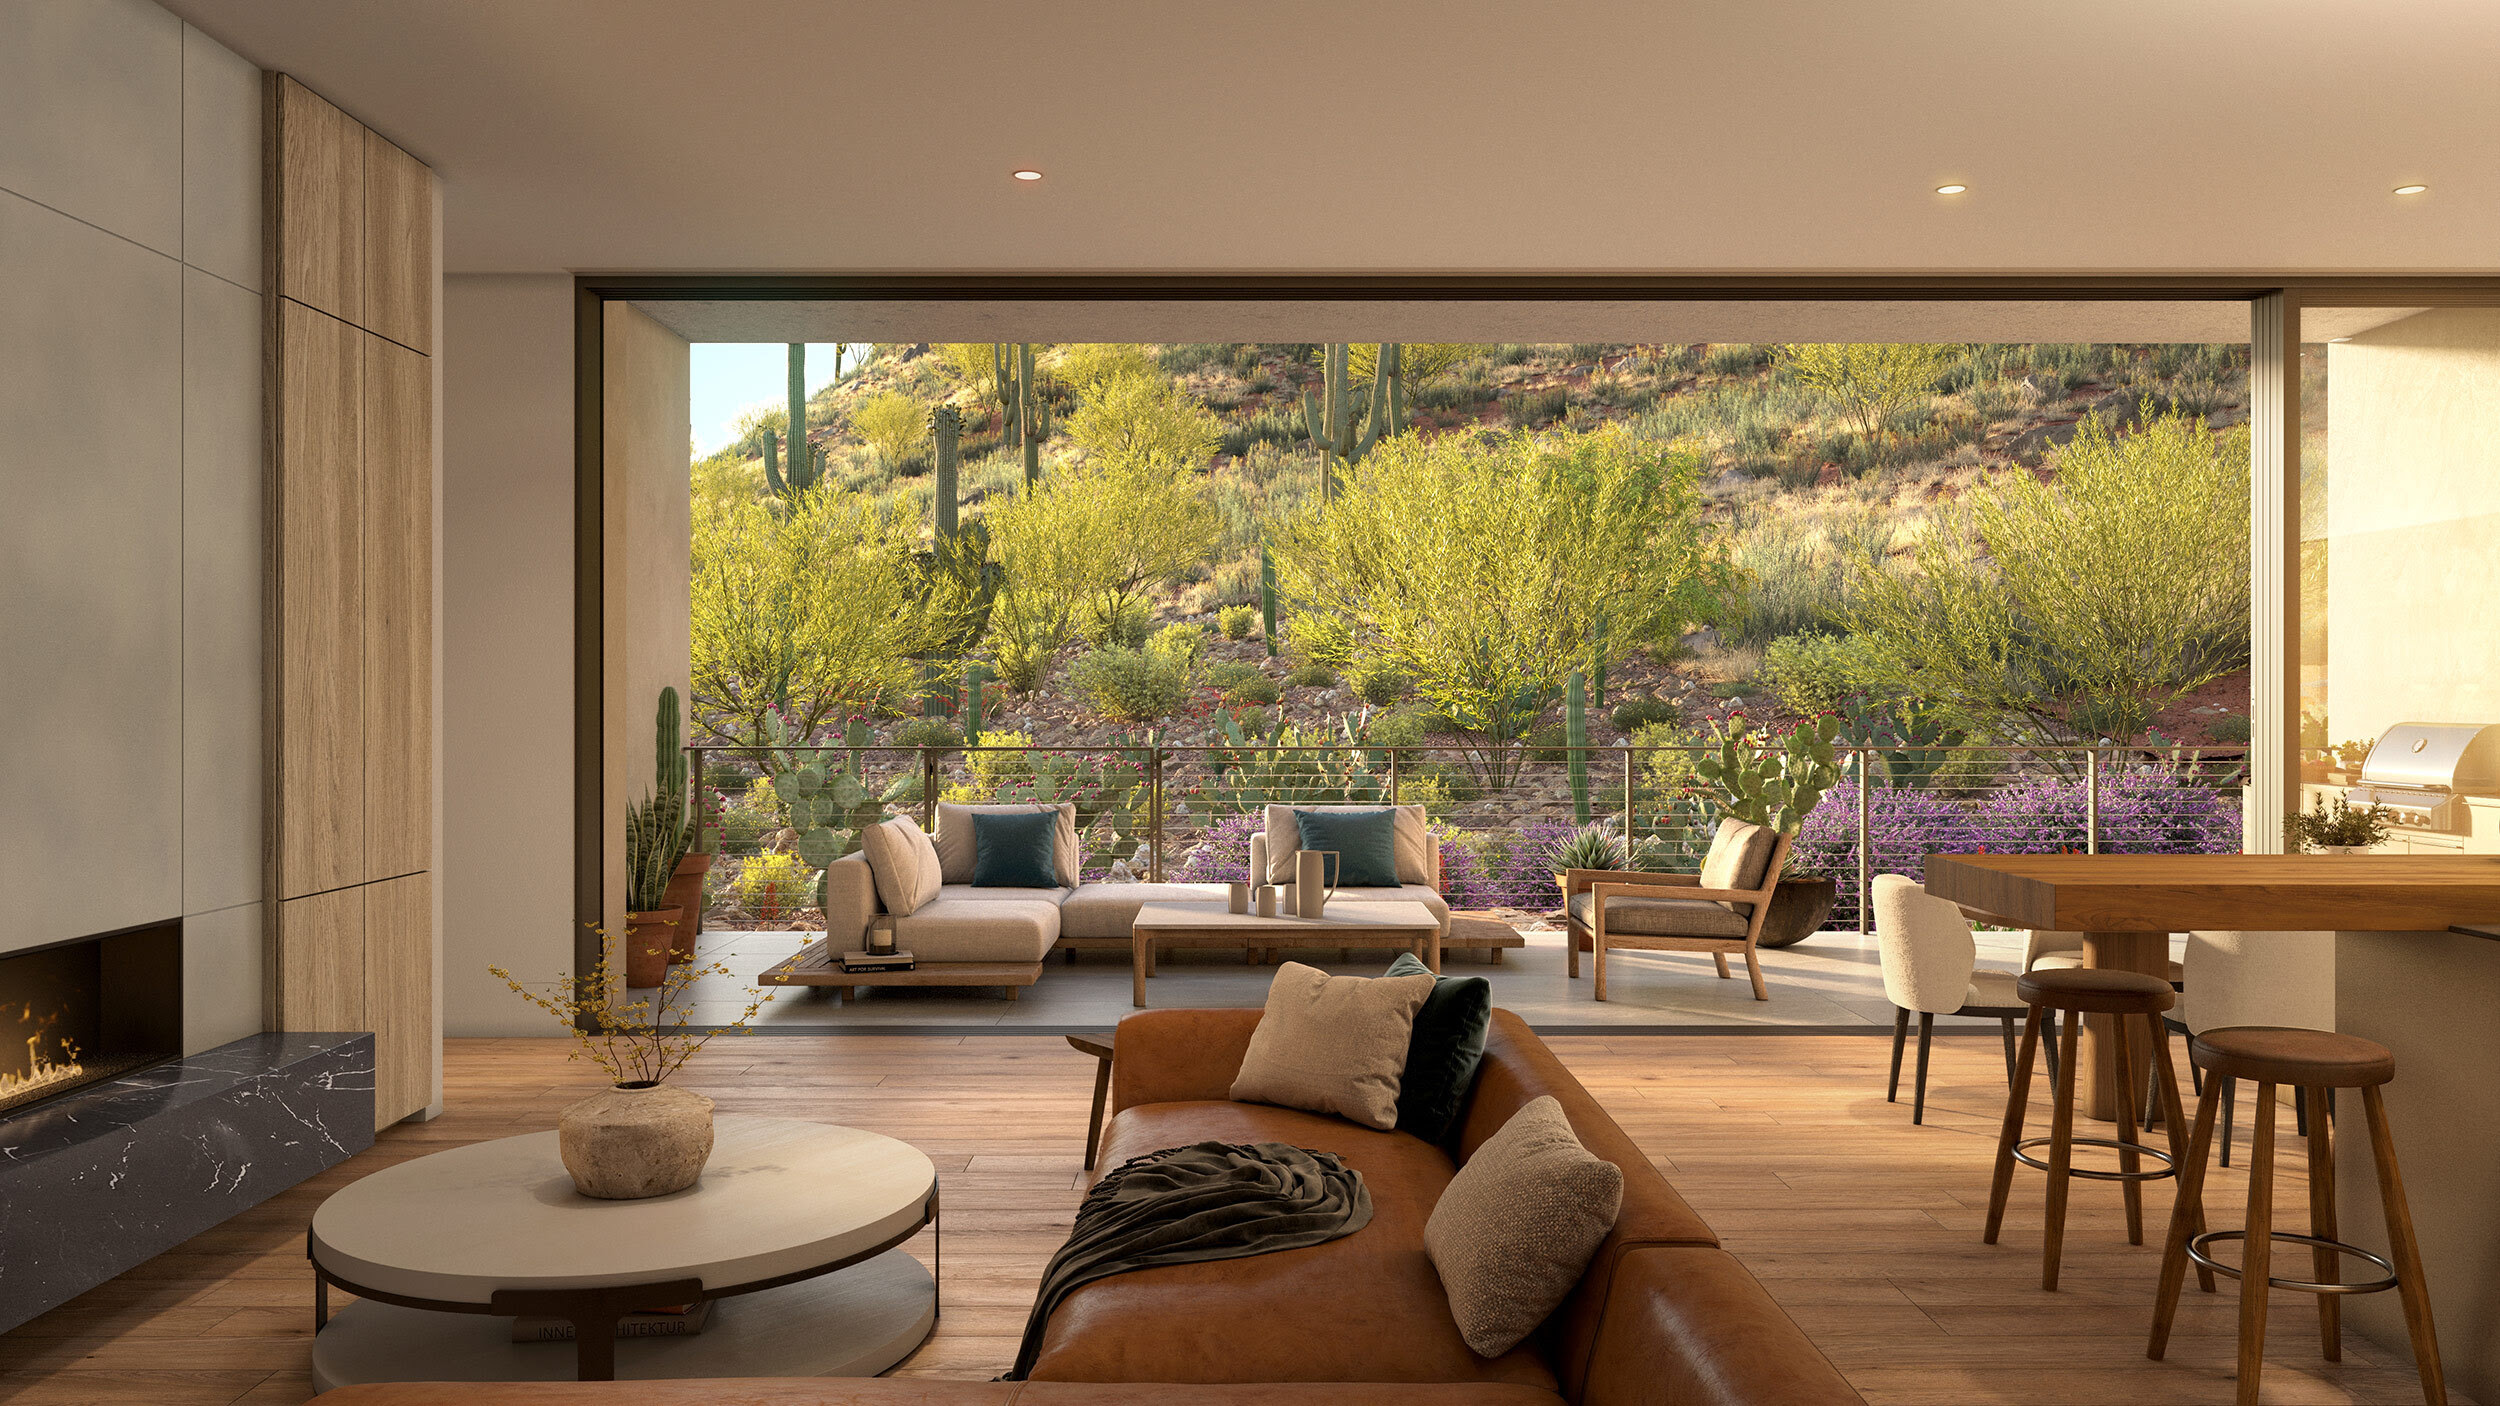 Enjoy the beauty of Camelback Mountain from the comfort of your home.